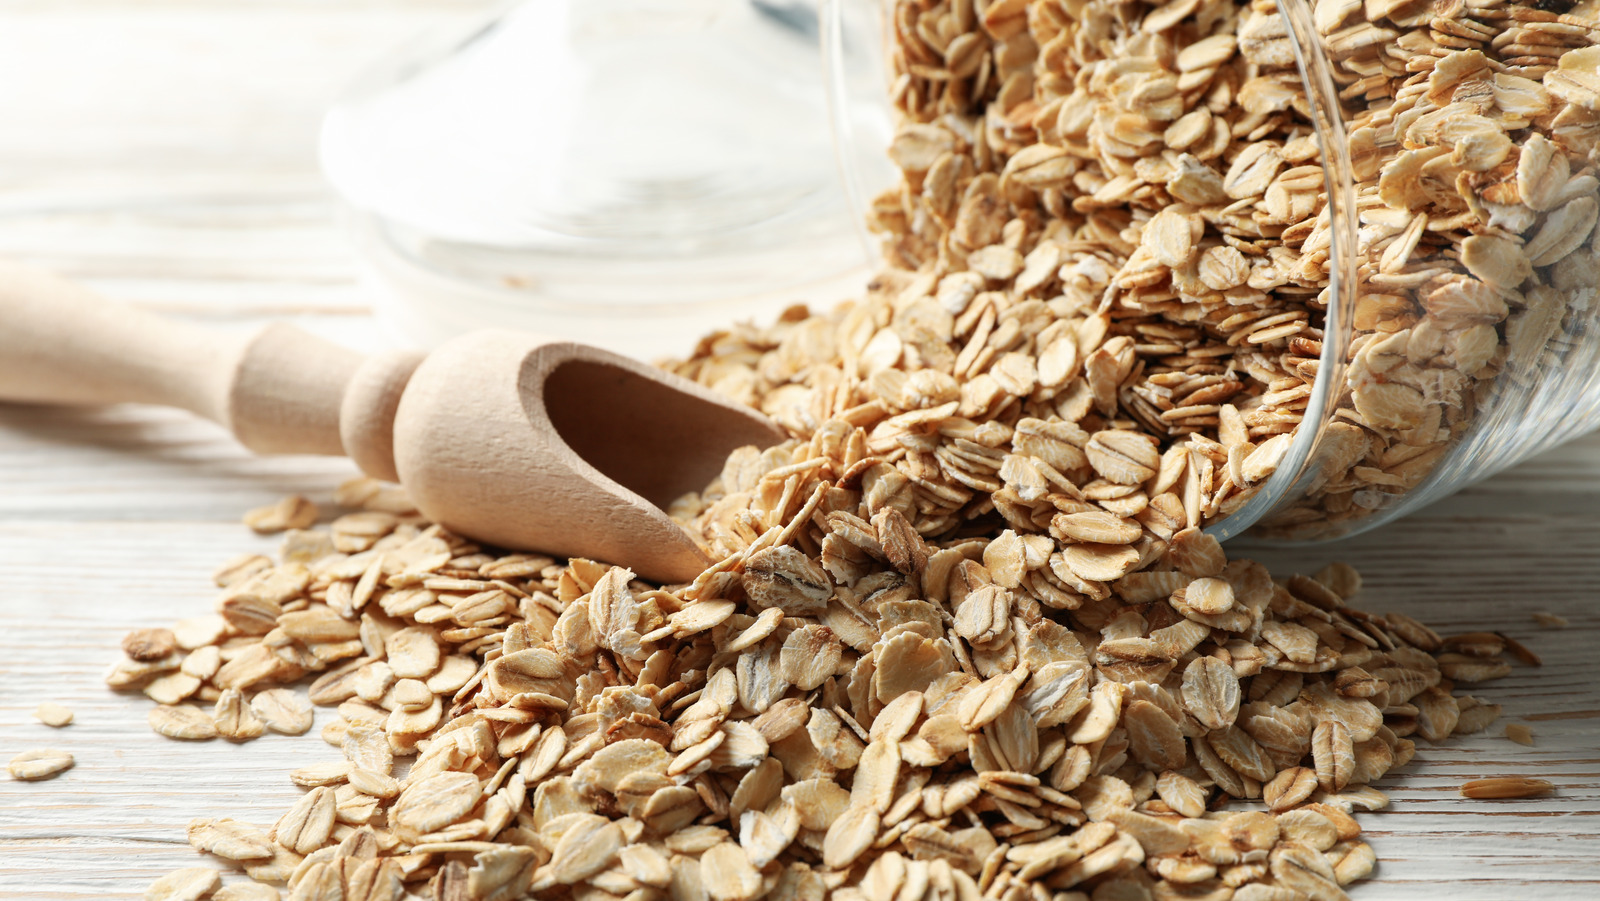 Is It Dangerous To Eat Expired Oats?